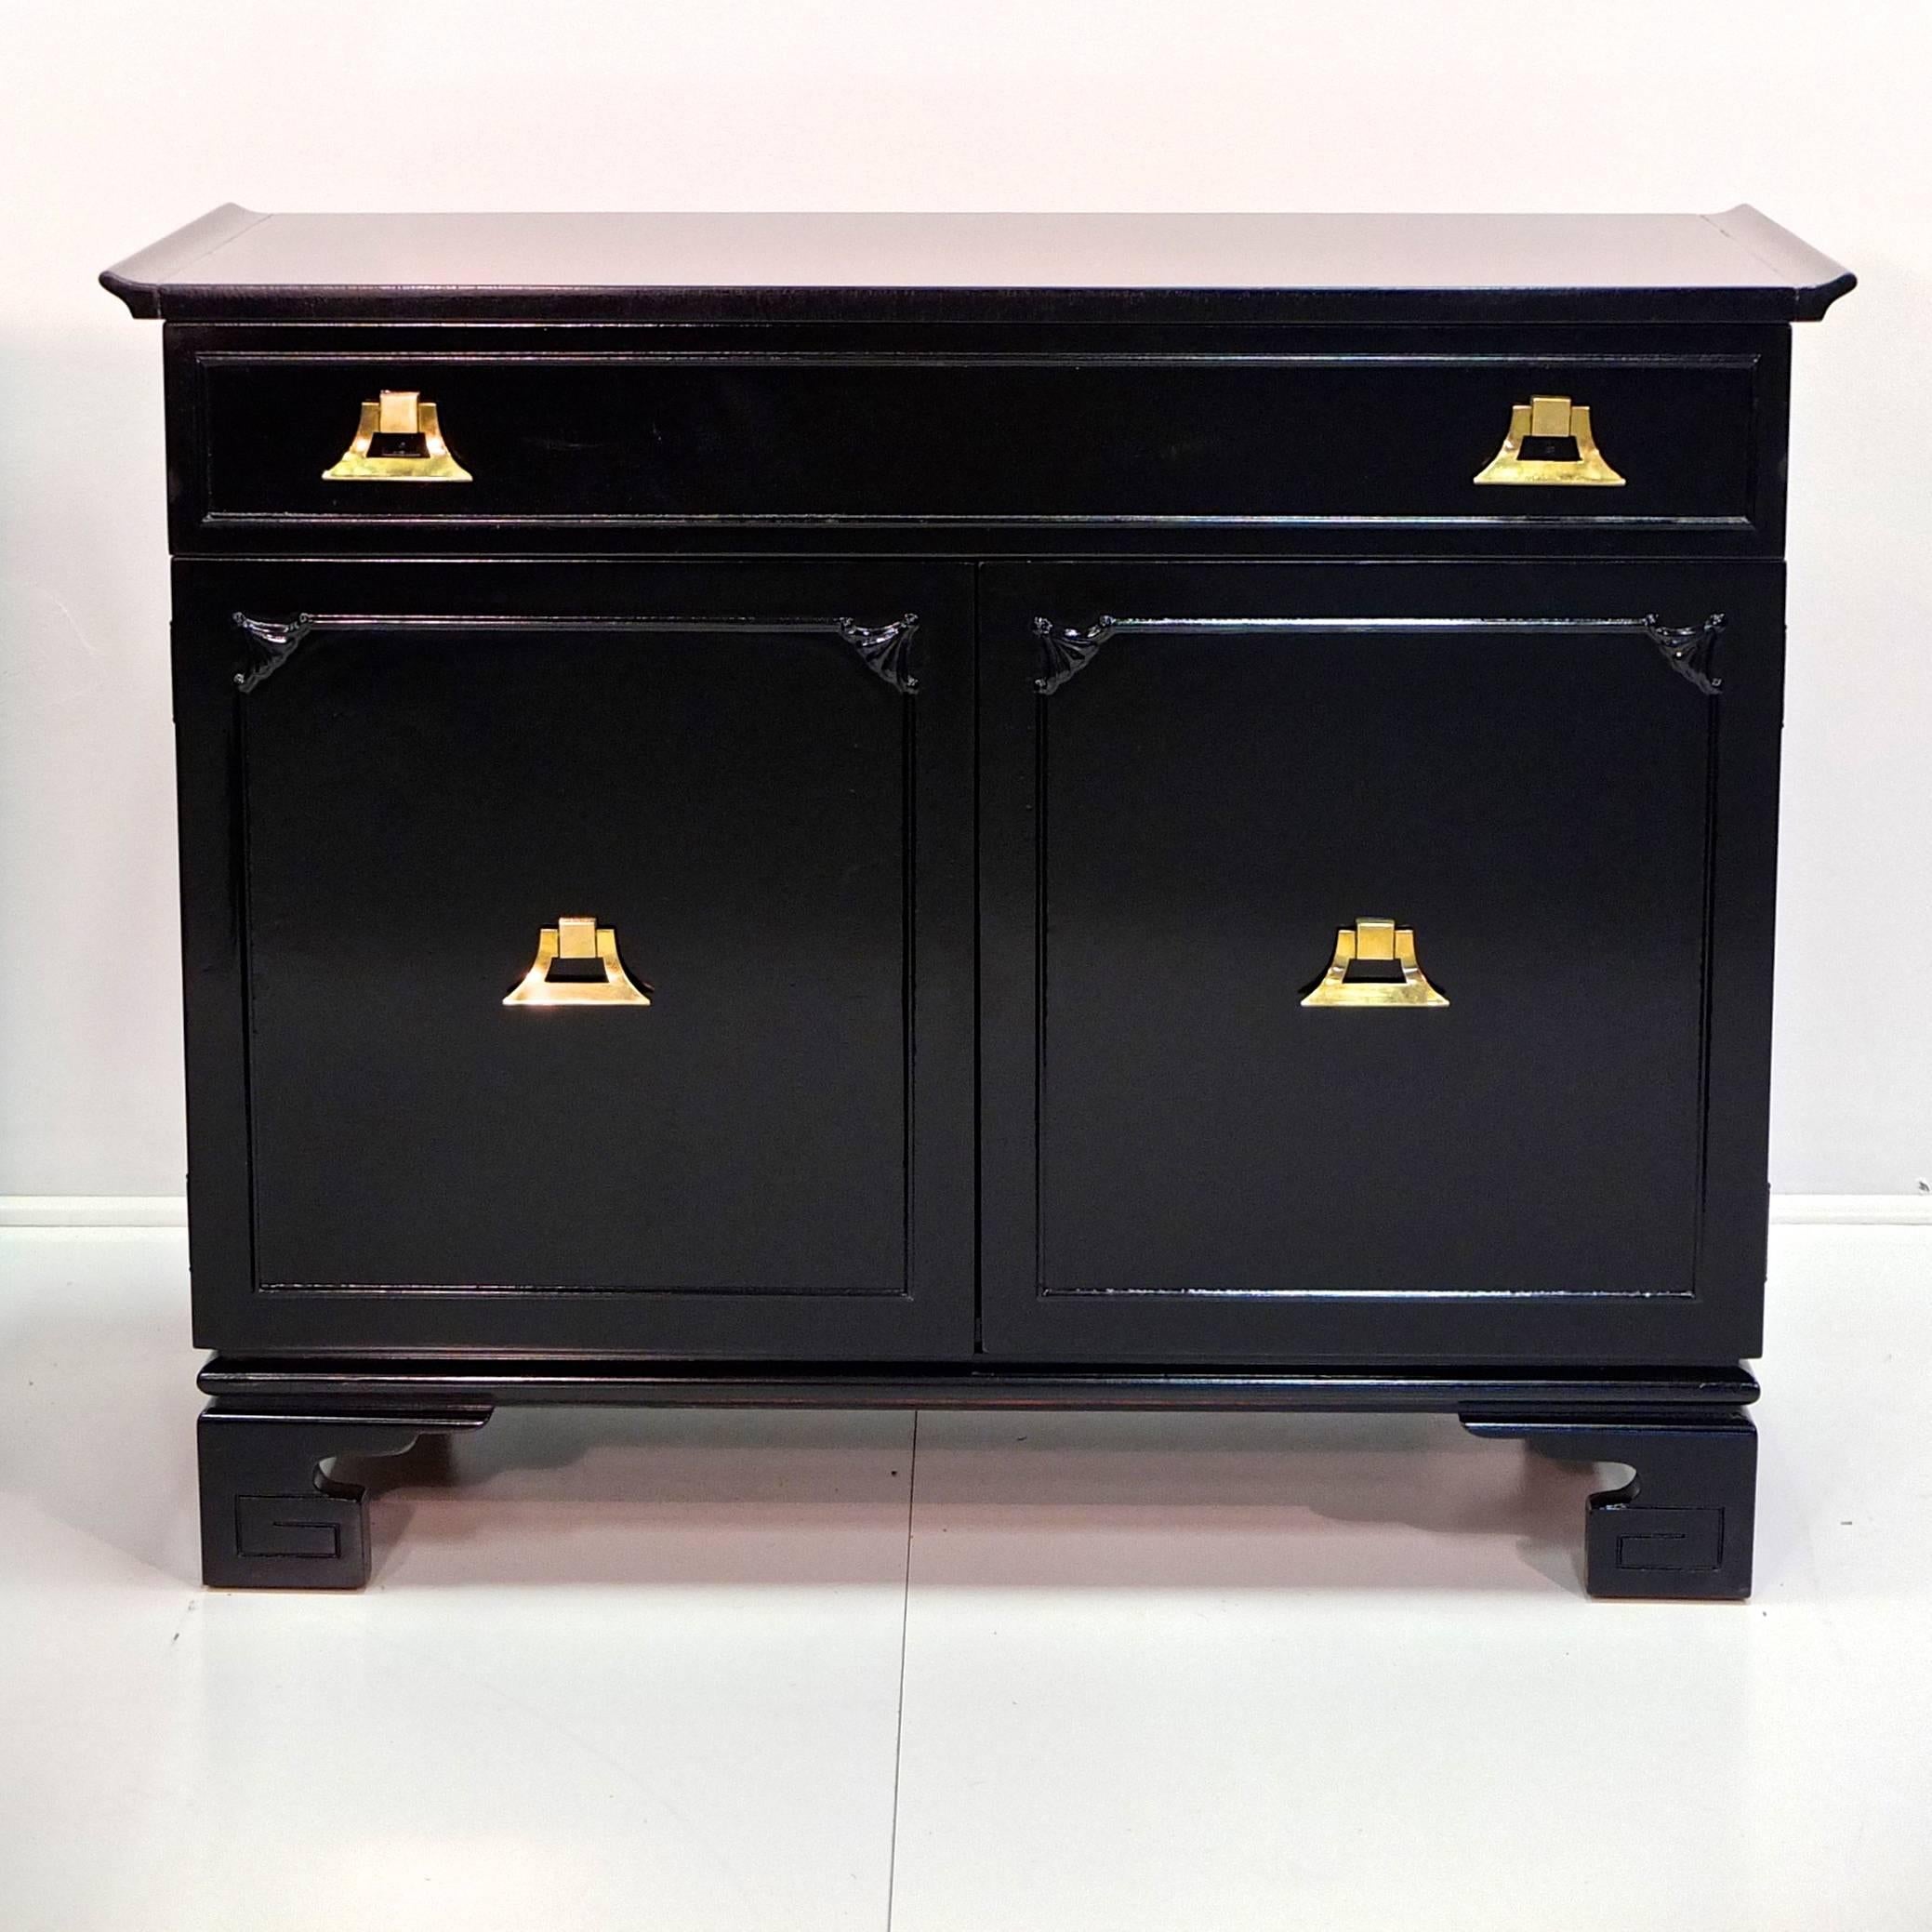 Sweet and chic pagoda form two-door, two-drawer cabinet in the style of James Mont with ming shaped feet and Asian motif detailing from the exotic modernist movement of the late 1940s early 1950s, including distinctive solid brass decorative pulls.